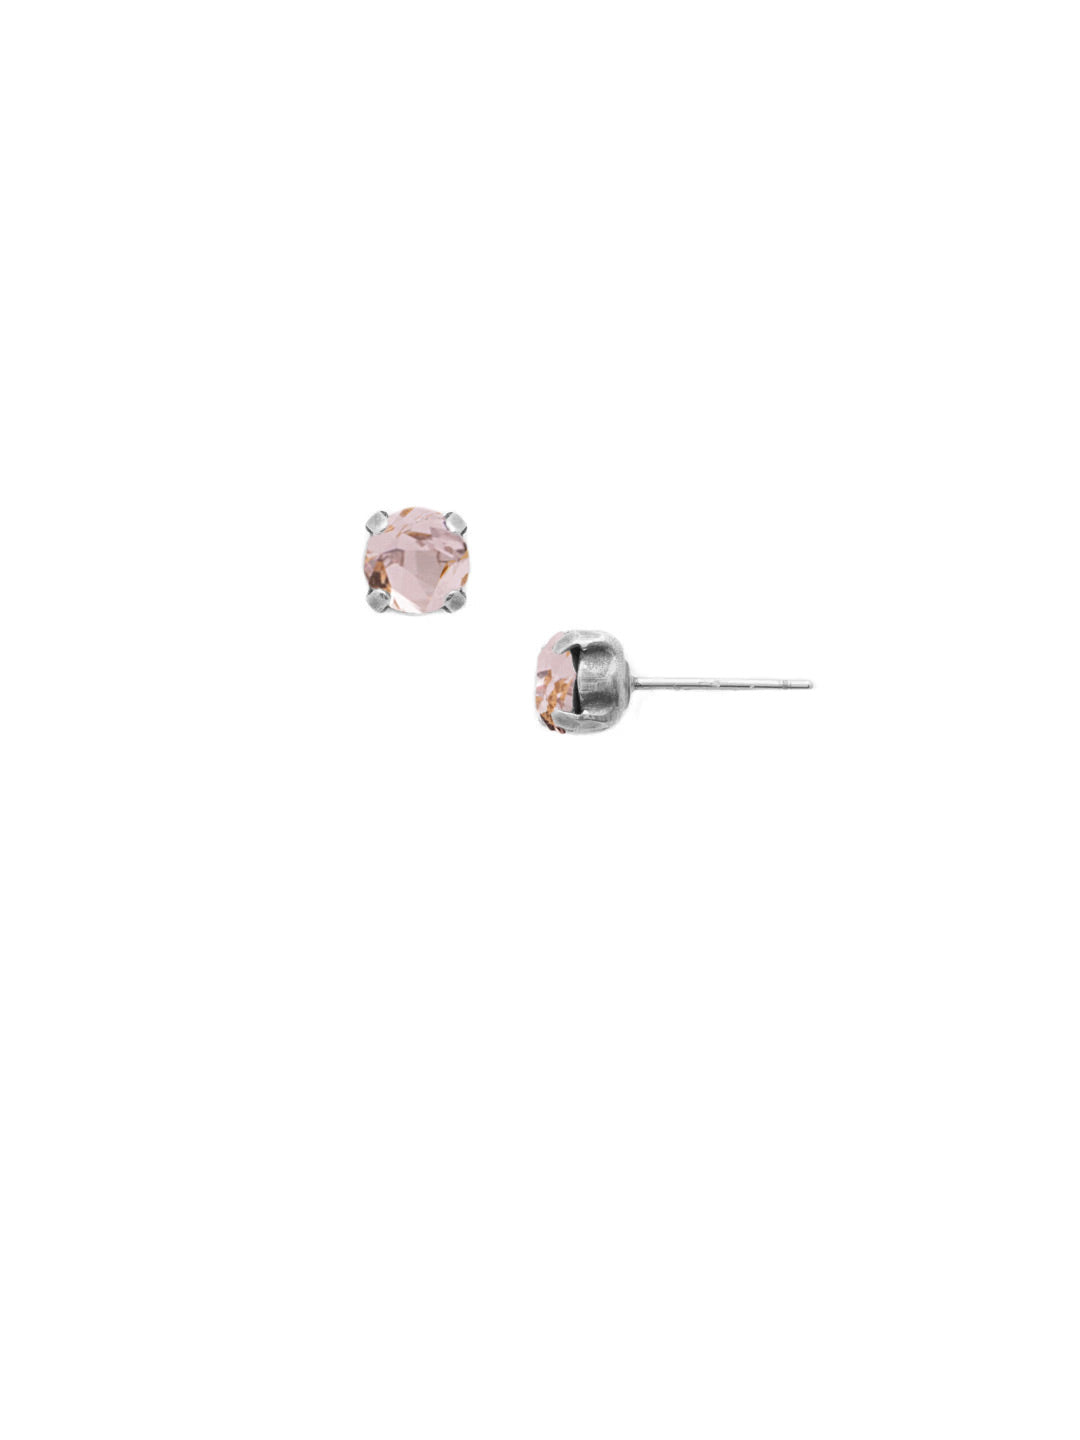 Jayda Stud Earrings - EDN32ASVIN - <p>The Jayda Stud Earrings are the perfect every day wardrobe staple. A round crystal nestles perfectly in a metal plated post with four prongs. </p><p>Need help picking a stud? <a href="https://www.sorrelli.com/blogs/sisterhood/round-stud-earrings-101-a-rundown-of-sizes-styles-and-sparkle">Check out our size guide!</a> From Sorrelli's Vintage Rose collection in our Antique Silver-tone finish.</p>